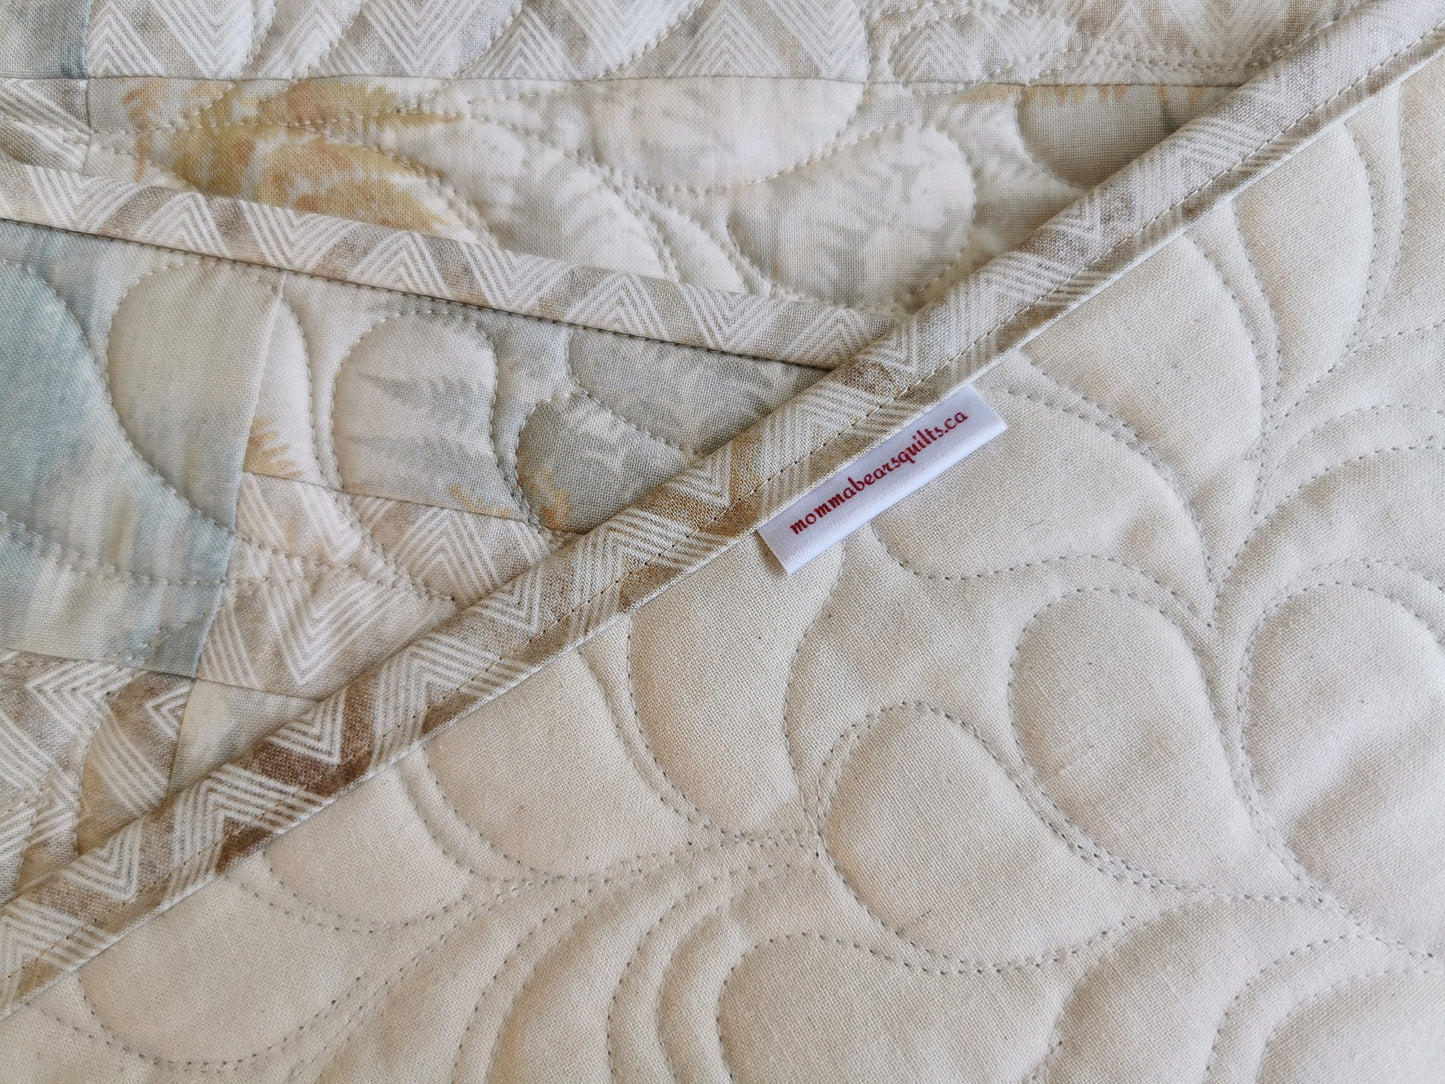 The quilted placemats have a plain ecru muslin  for the backing, shown here. Freehand feather quilting detail is also visible, in this close up.